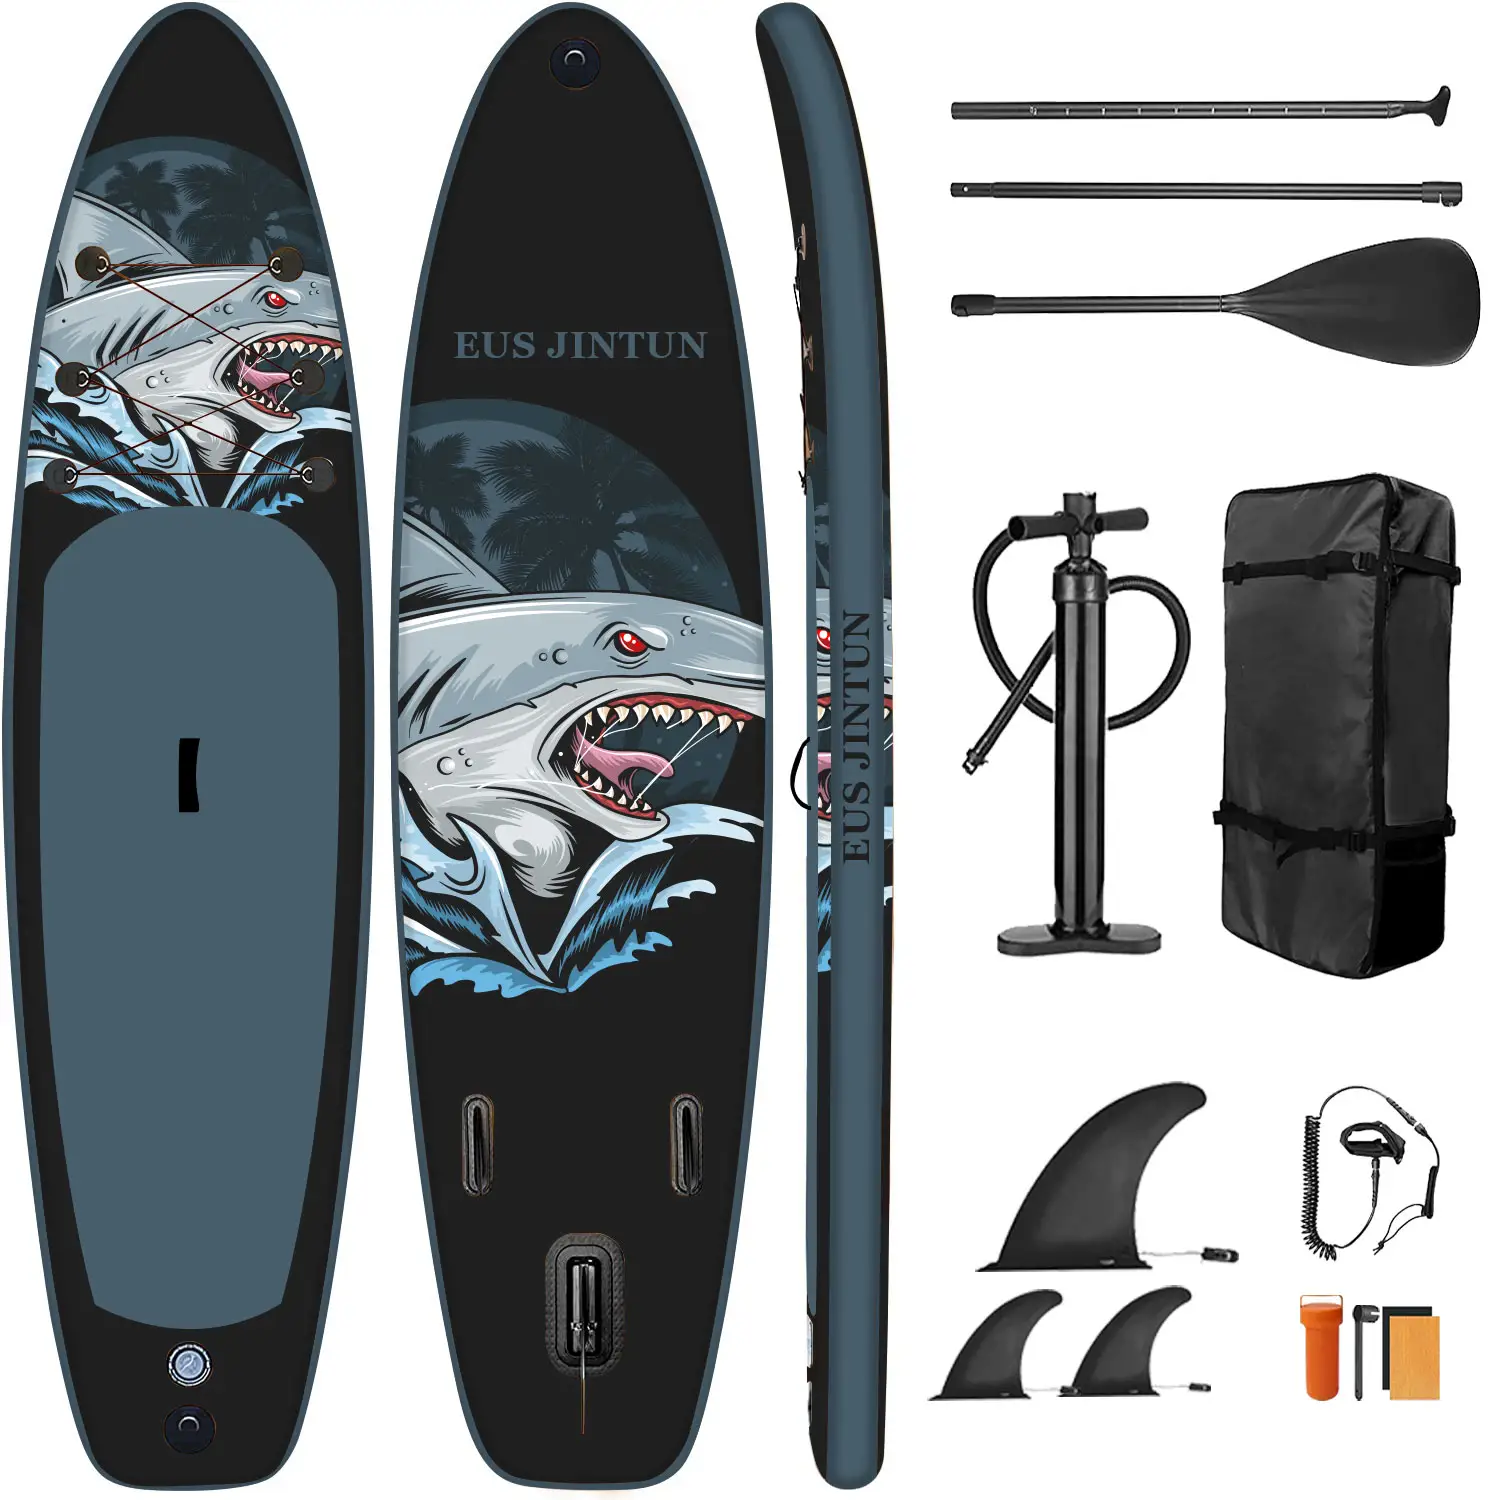 OEM customized wholesale paddleboard sap sub fishing gonflable surf standup sup inflatable stand up paddle board